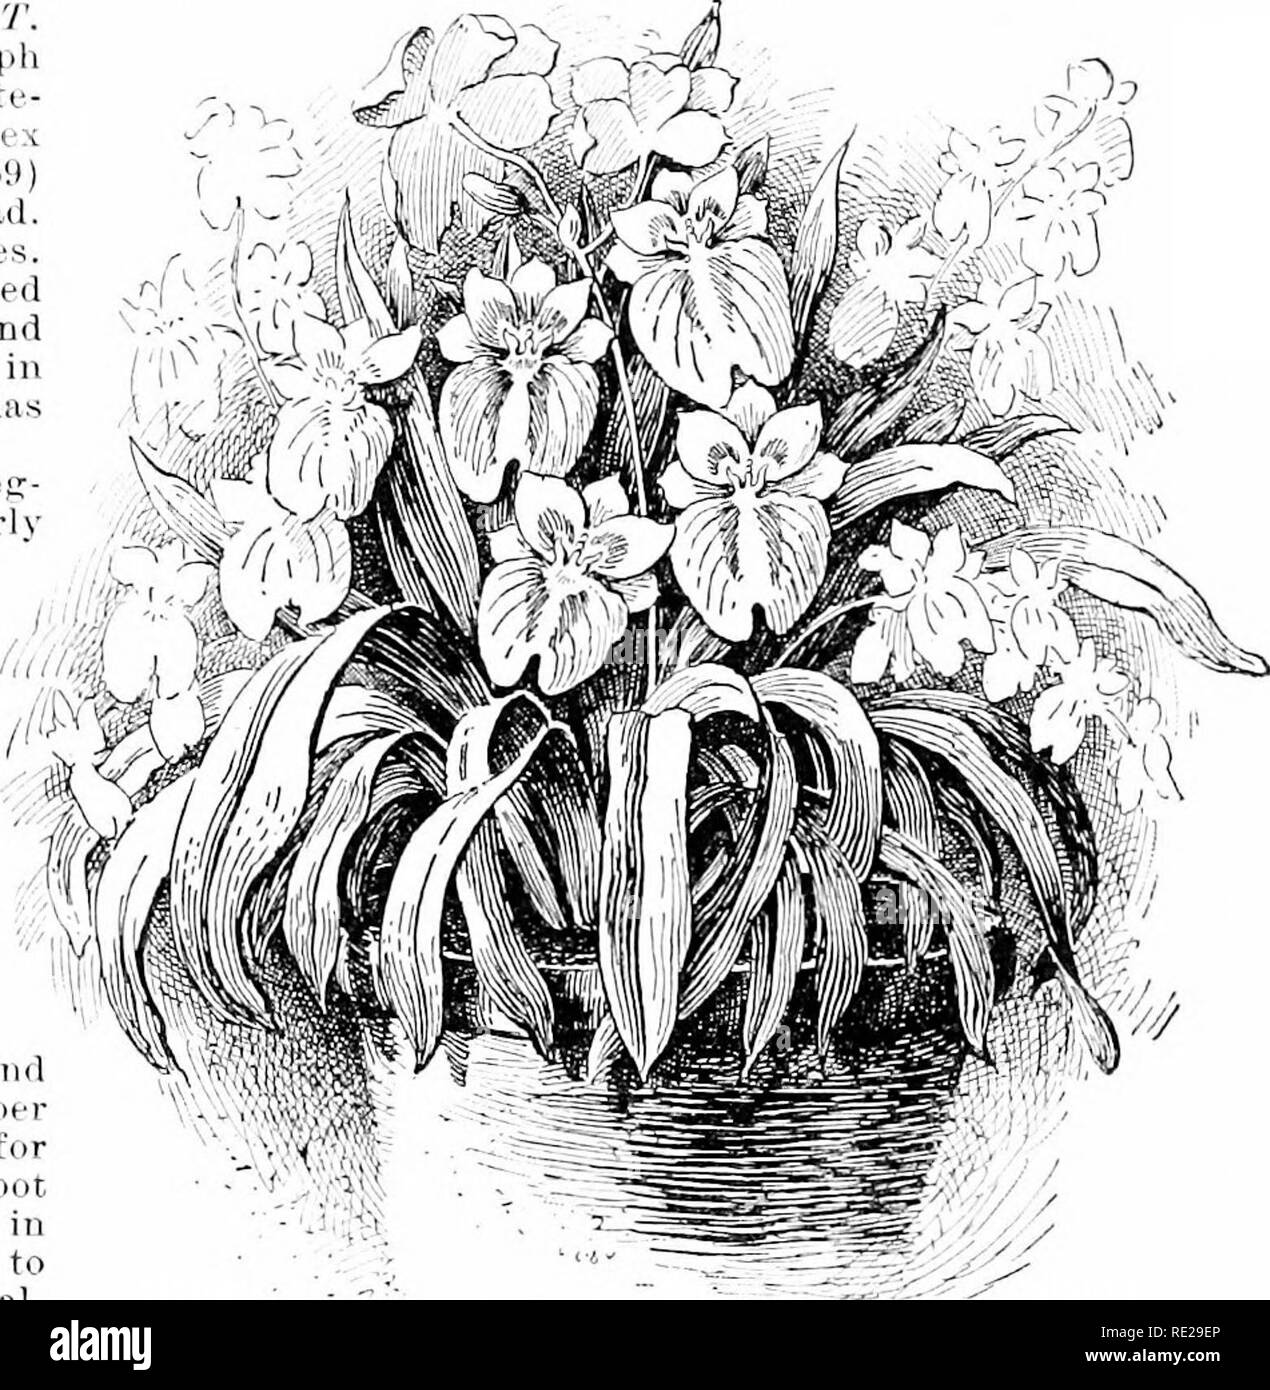 . Cyclopedia of American horticulture, comprising suggestions for cultivation of horticultural plants, descriptions of the species of fruits, vegetables, flowers, and ornamental plants sold in the United States and Canada, together with geographical and biographical sketches. Gardening. MILLA JIILTilXIA lOU MILLA. (J. Milla was bead fjanlener at the Court of Madrid)- LiUAcccr. Bentharu &amp; HooKcr restrict the Â£;enus Milla (as Cavaiiillos, its author, intended) to one â species, M. bifloni. From Brodifiea the /ireuus differs in the fact that the pedicels are not .ioiuted and the peri- anth s Stock Photo